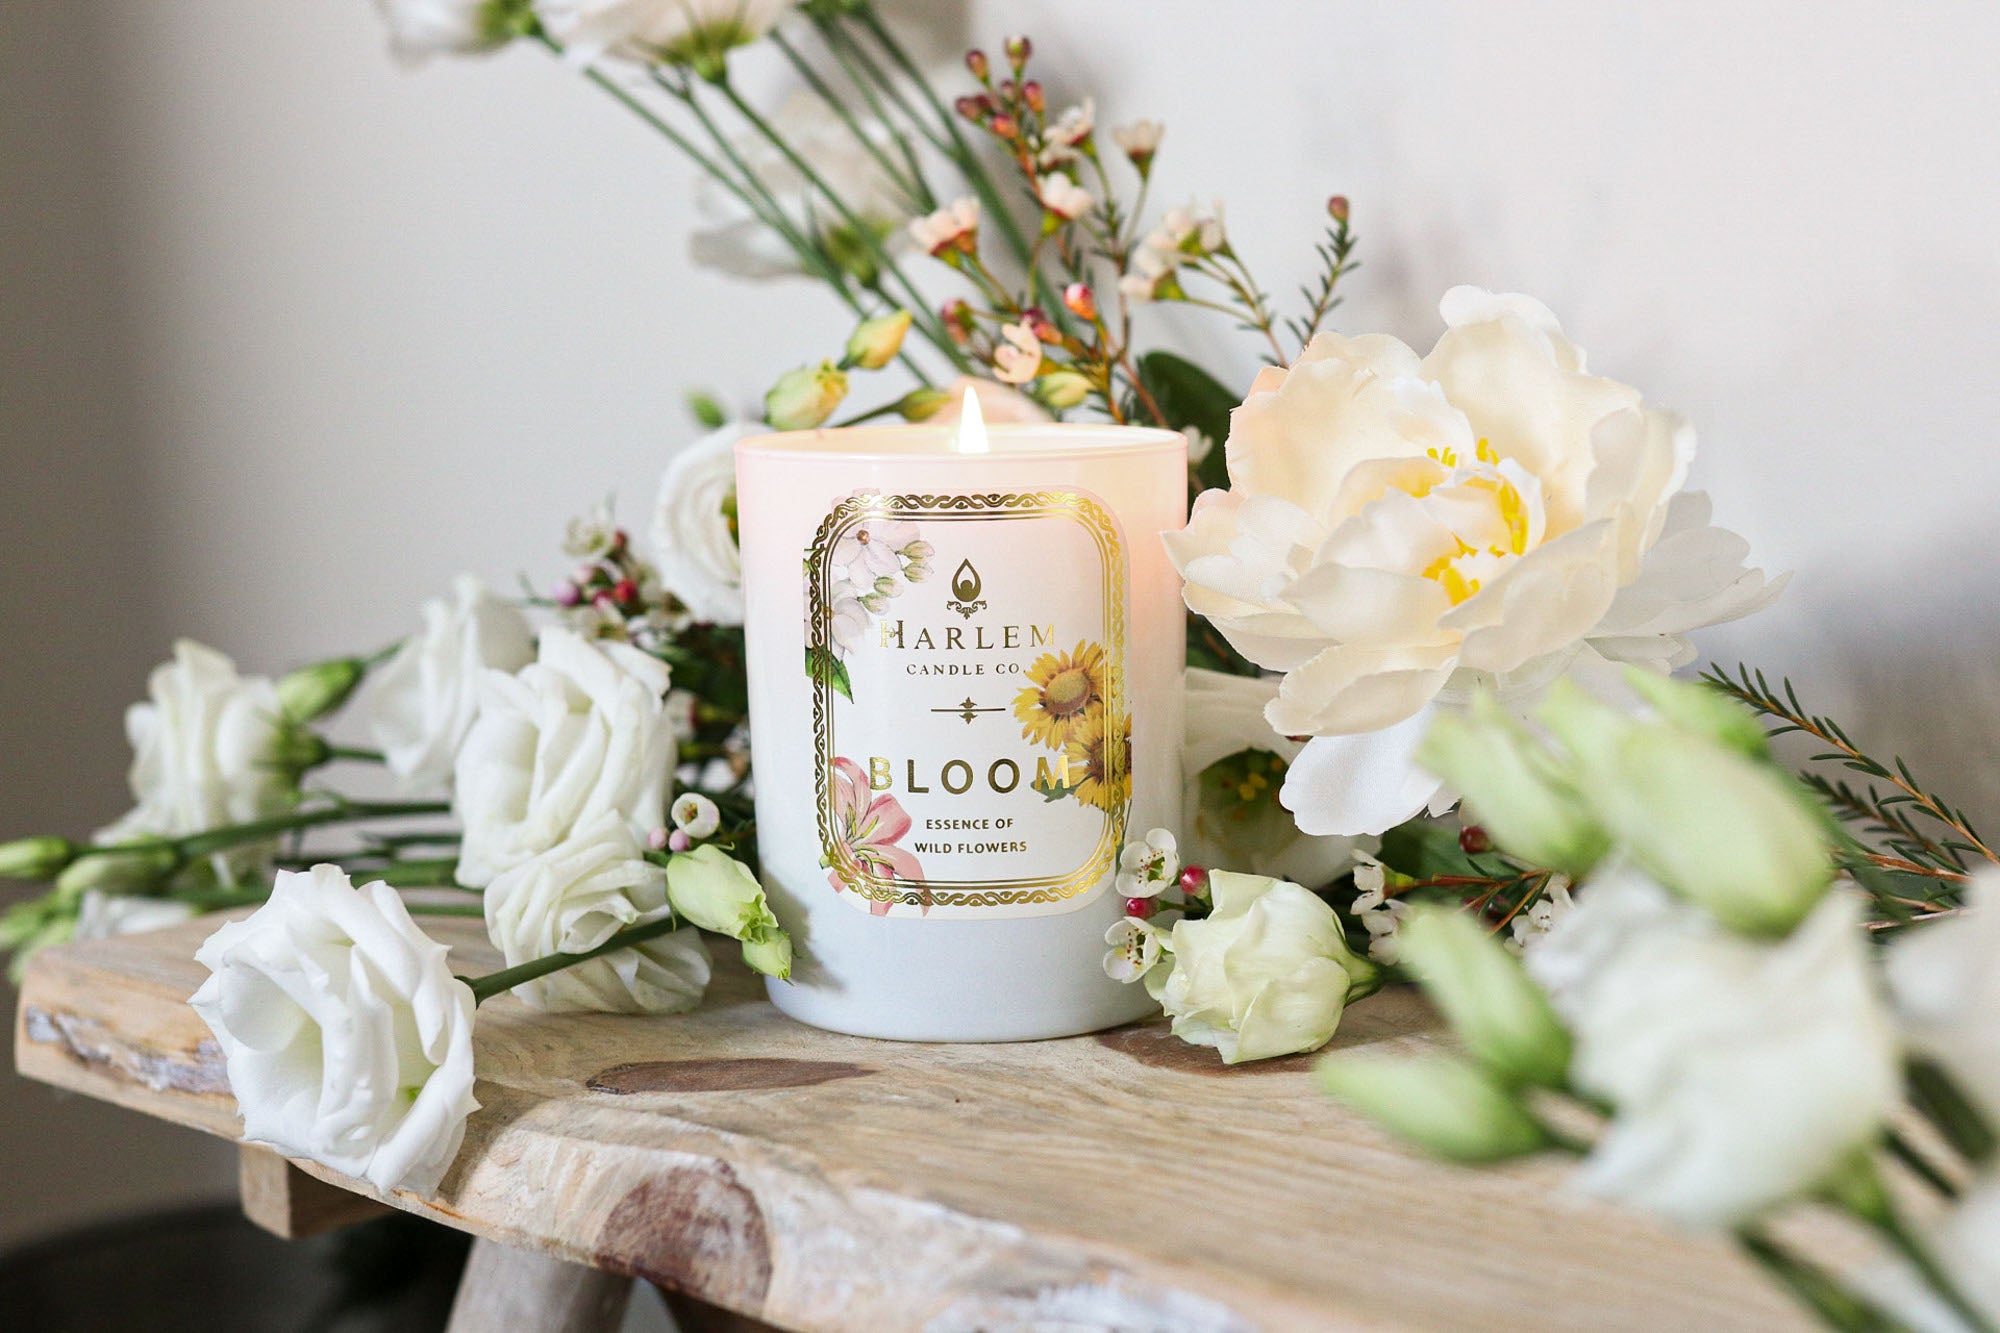 This is a lifestyle image of our bloom candle, surrounded by flowers